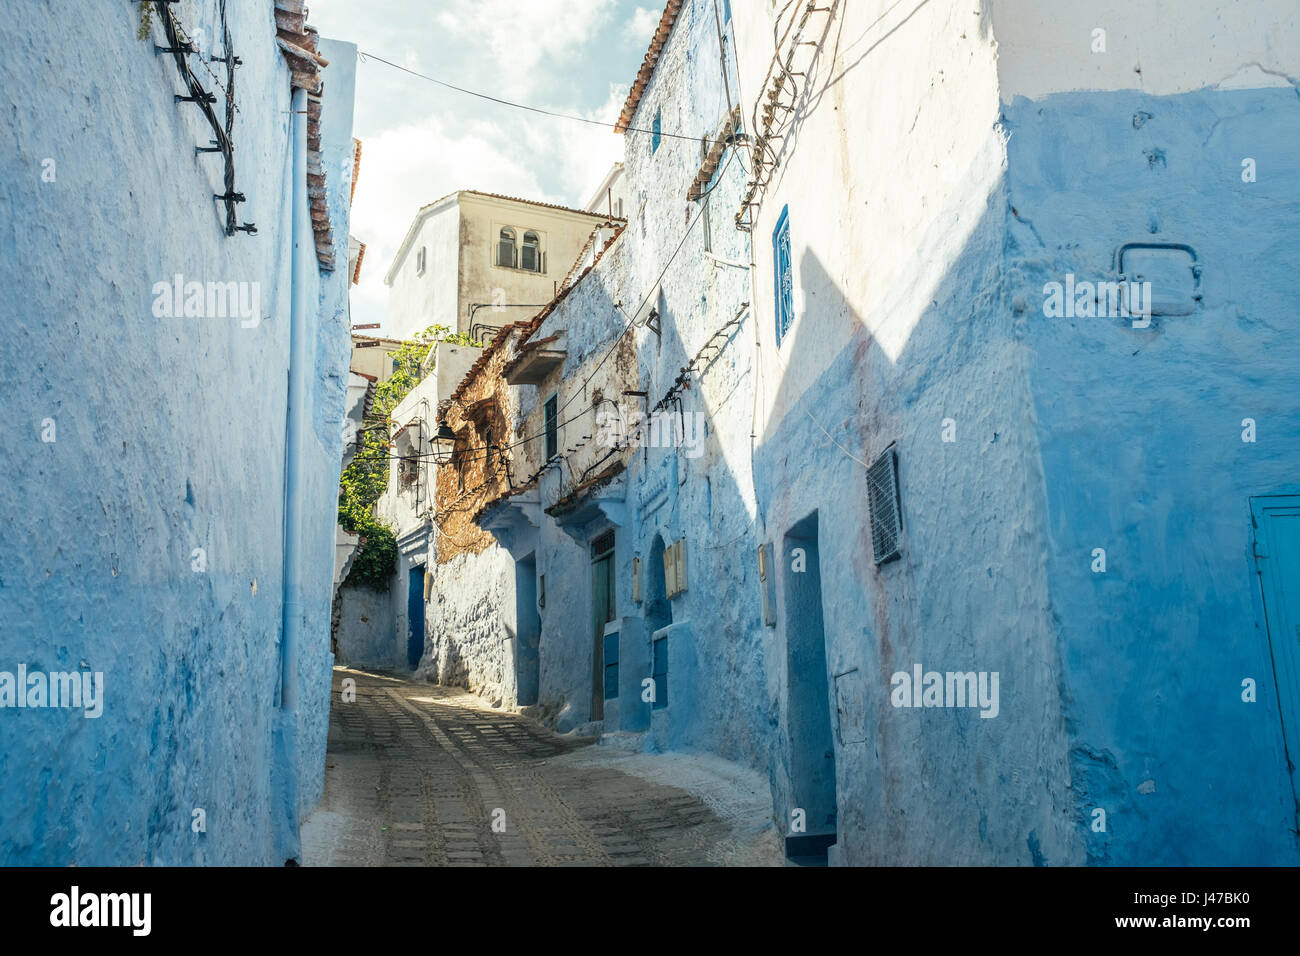 Bright blue coloured Chefchaouen old town Stock Photo